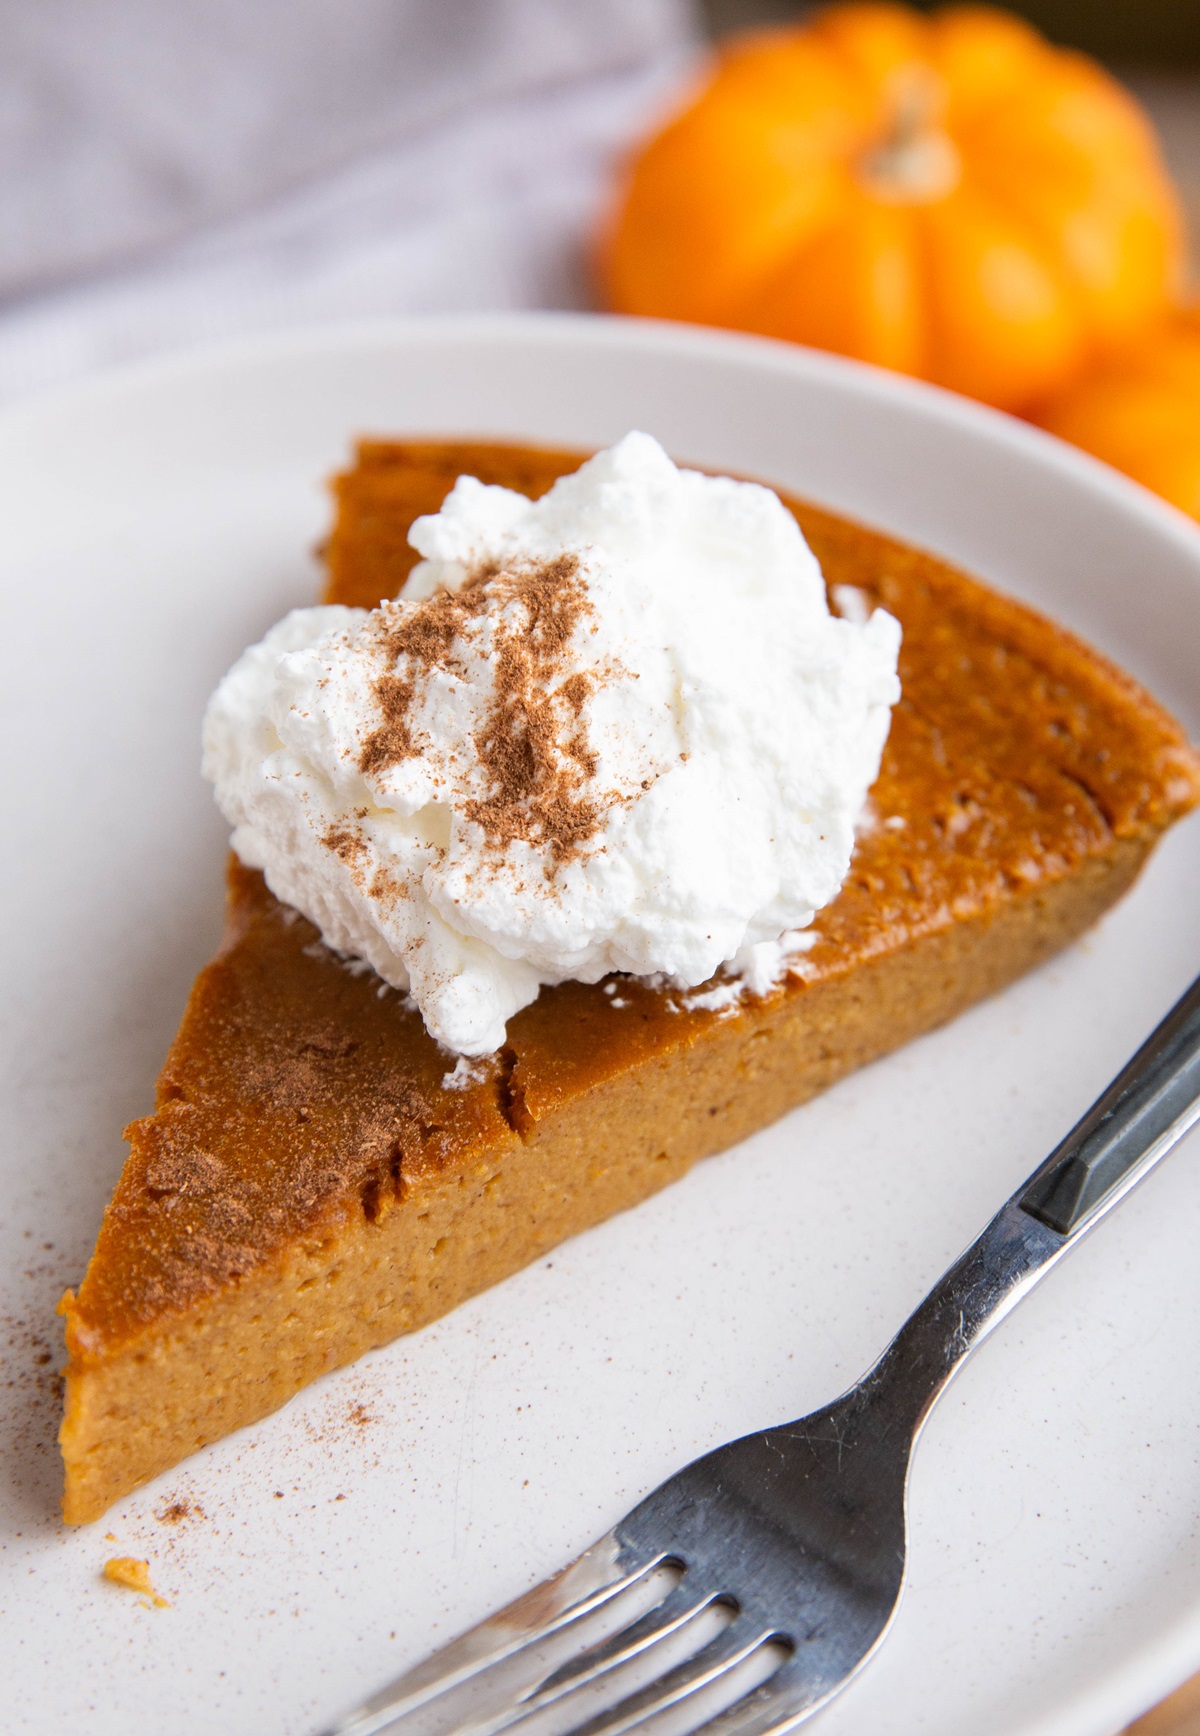 Closeup on a slice of crustless pumpkin pie with whipped cream and sprinkled cinnamon on top.